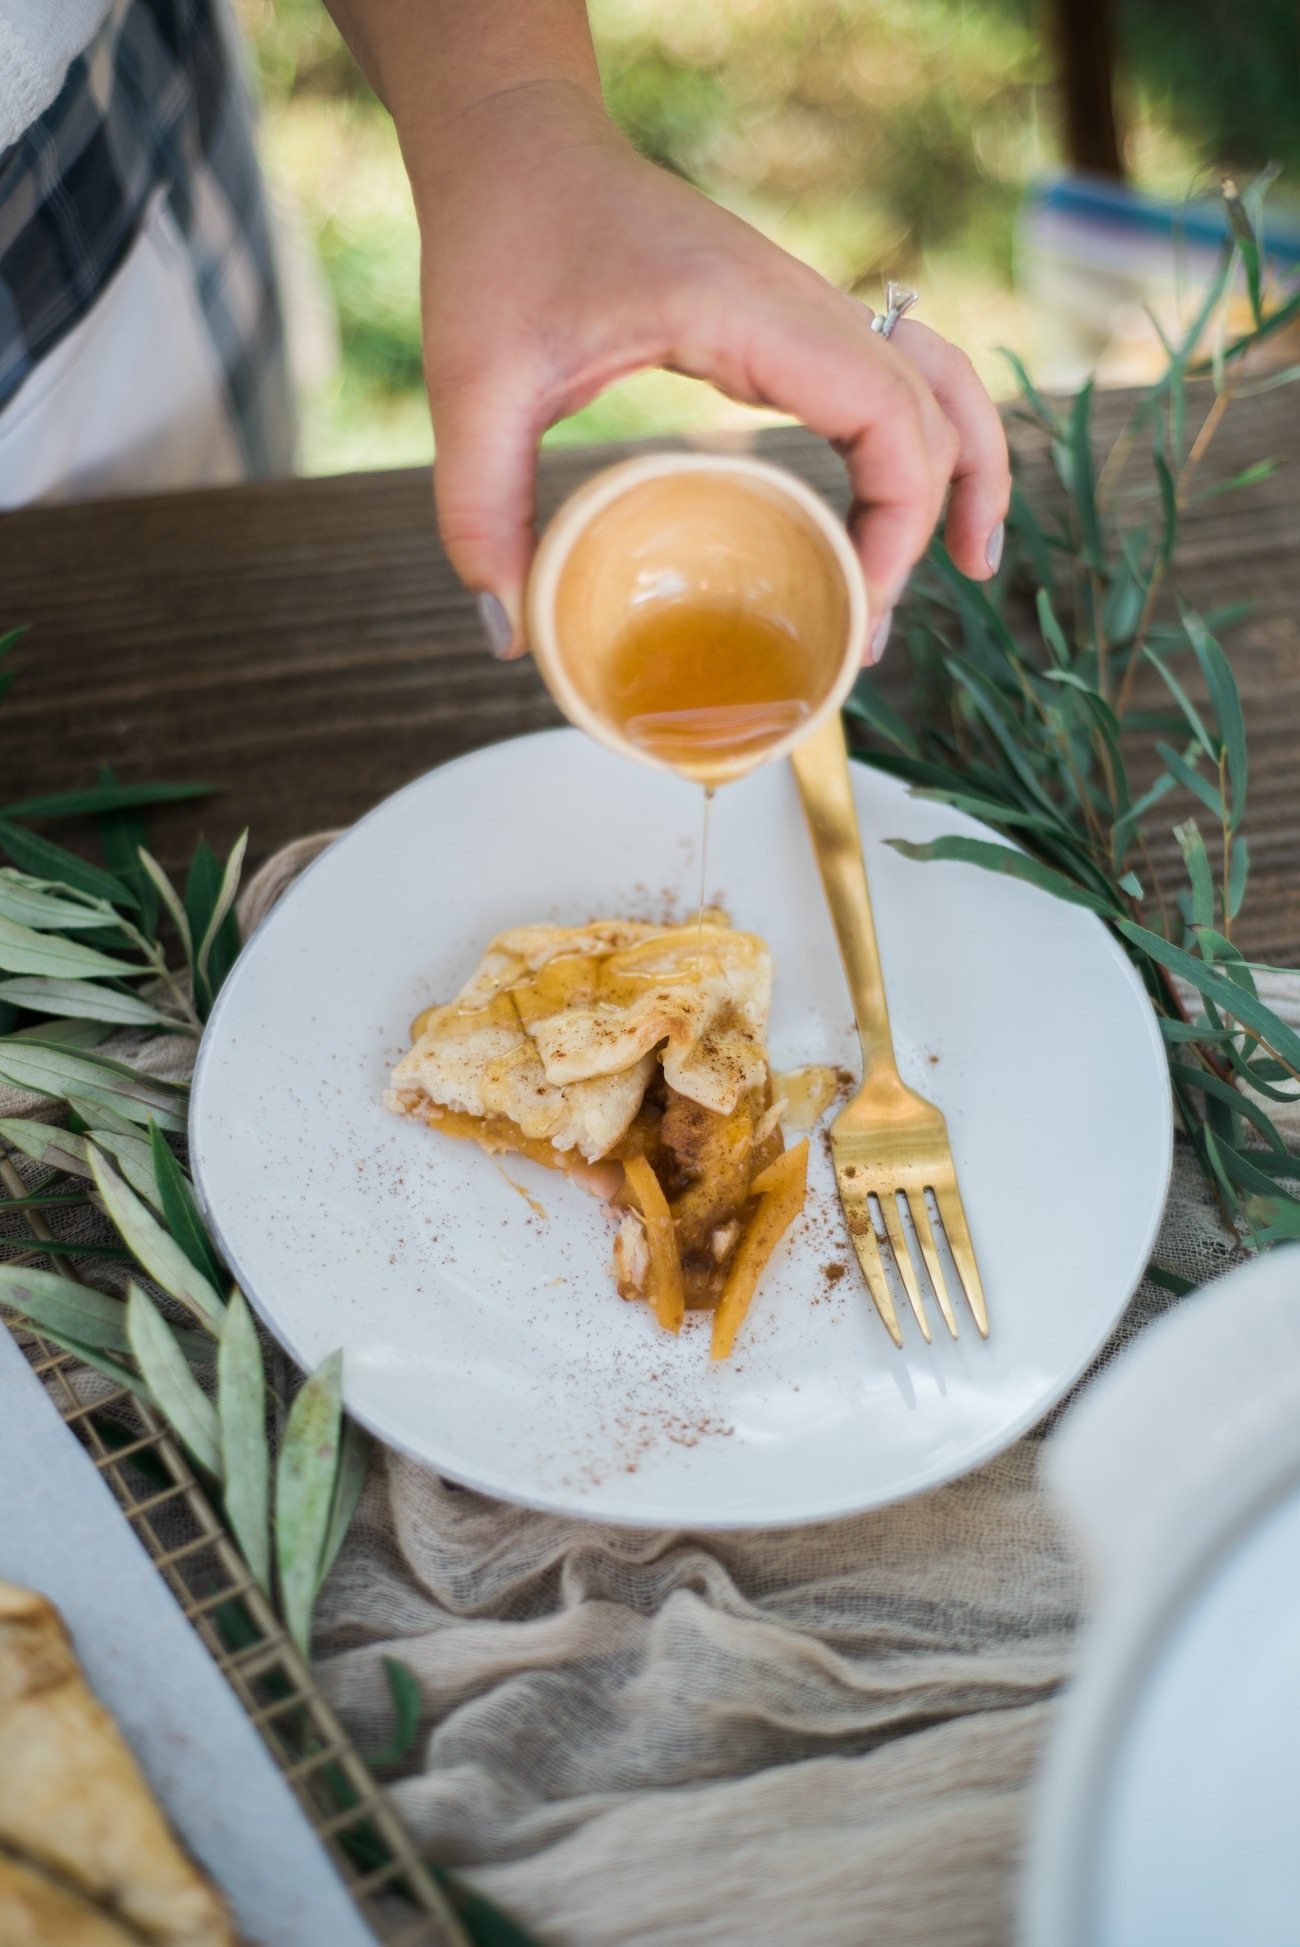 A Garden to Table Fall Dinner Party | Entertaining tips, party ideas, dinner party recipes, cocktail recipes and more from @cydconverse